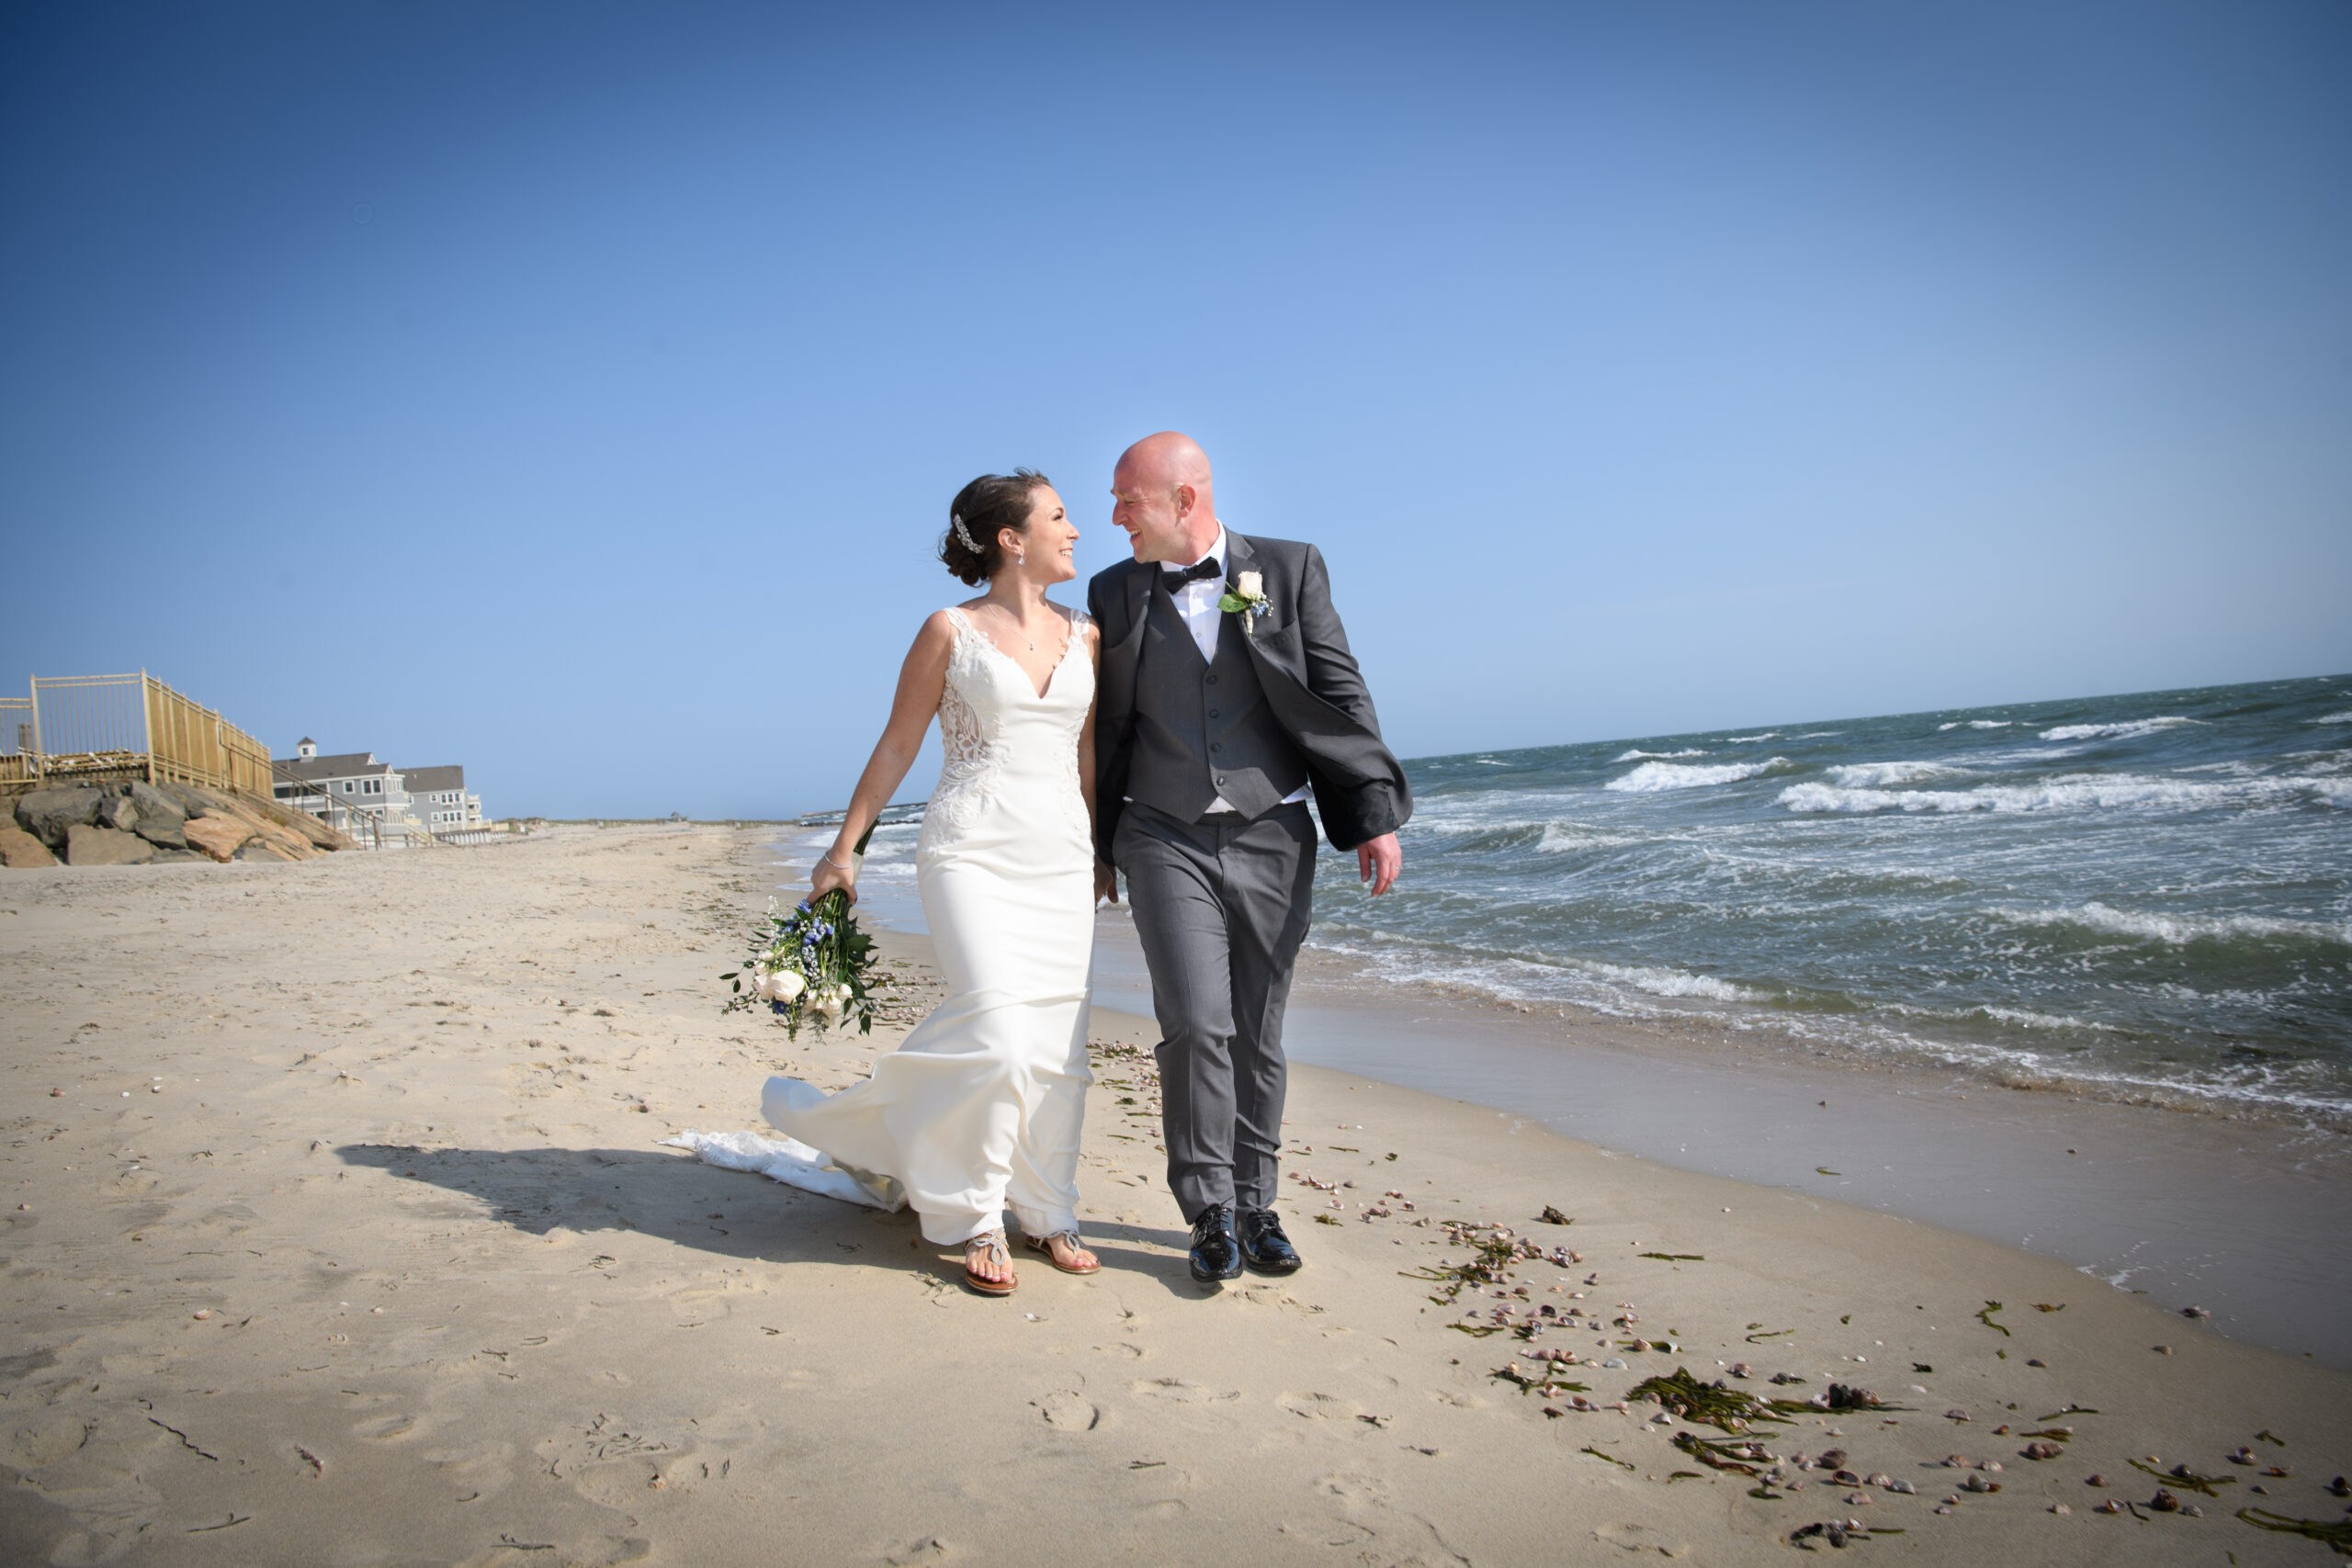 Bride in white lace dress and groom in suit walk down the beach on a sunny day highlighting a wedding timeline with first look